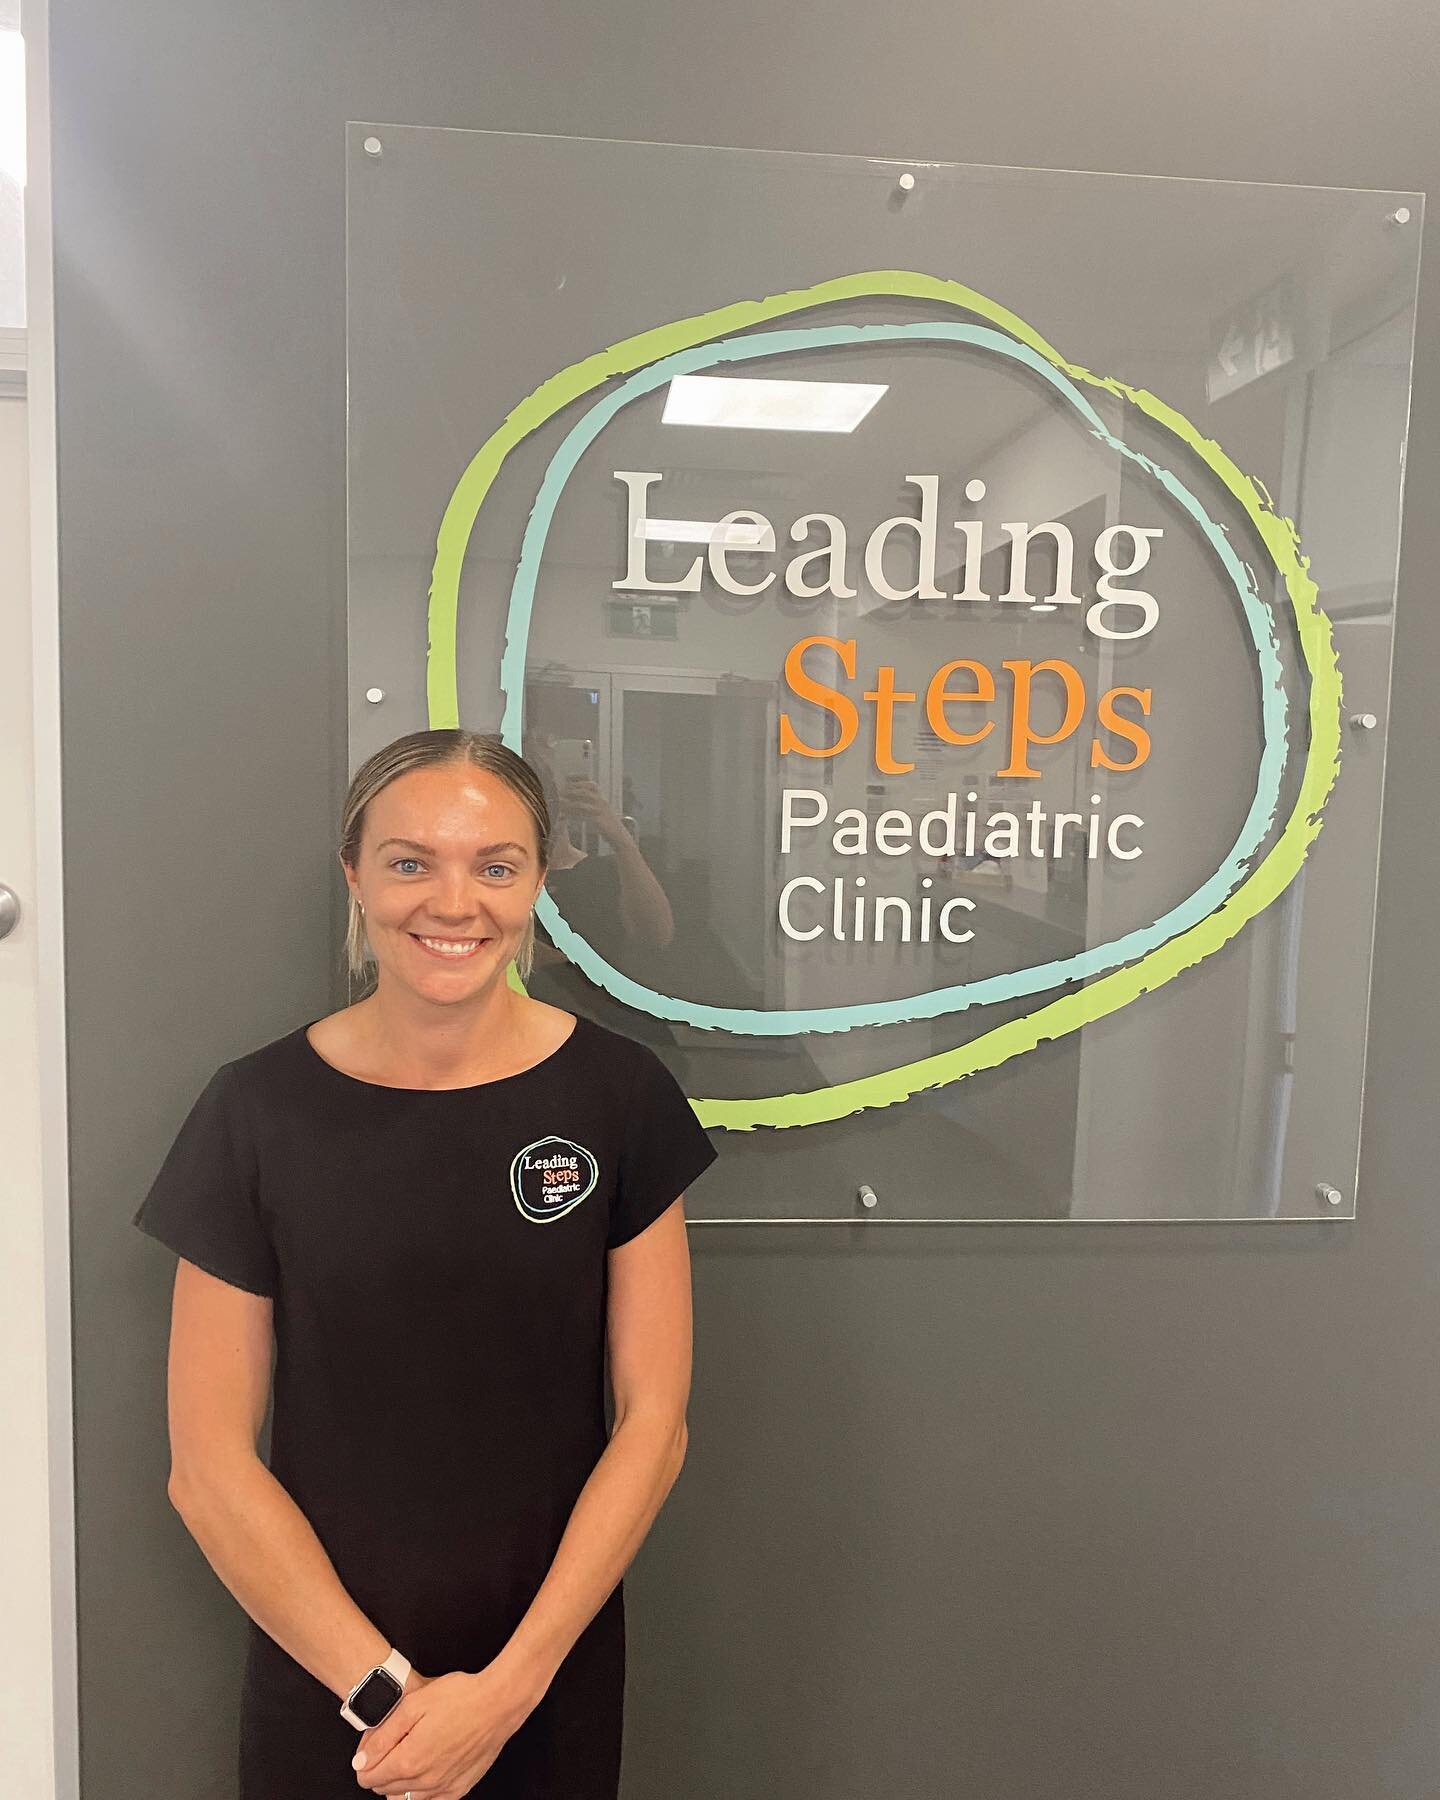 YOUR SAY WEDNESDAY 👨&zwj;⚕️

Every Wednesday we will ask one of our Leading Steps staff member&rsquo;s 3 important questions 🤔🤗 Today we ask one of our administration staff, Steph, who has worked at LSPC on and off since 2016. 

Coffee order? 
Tri